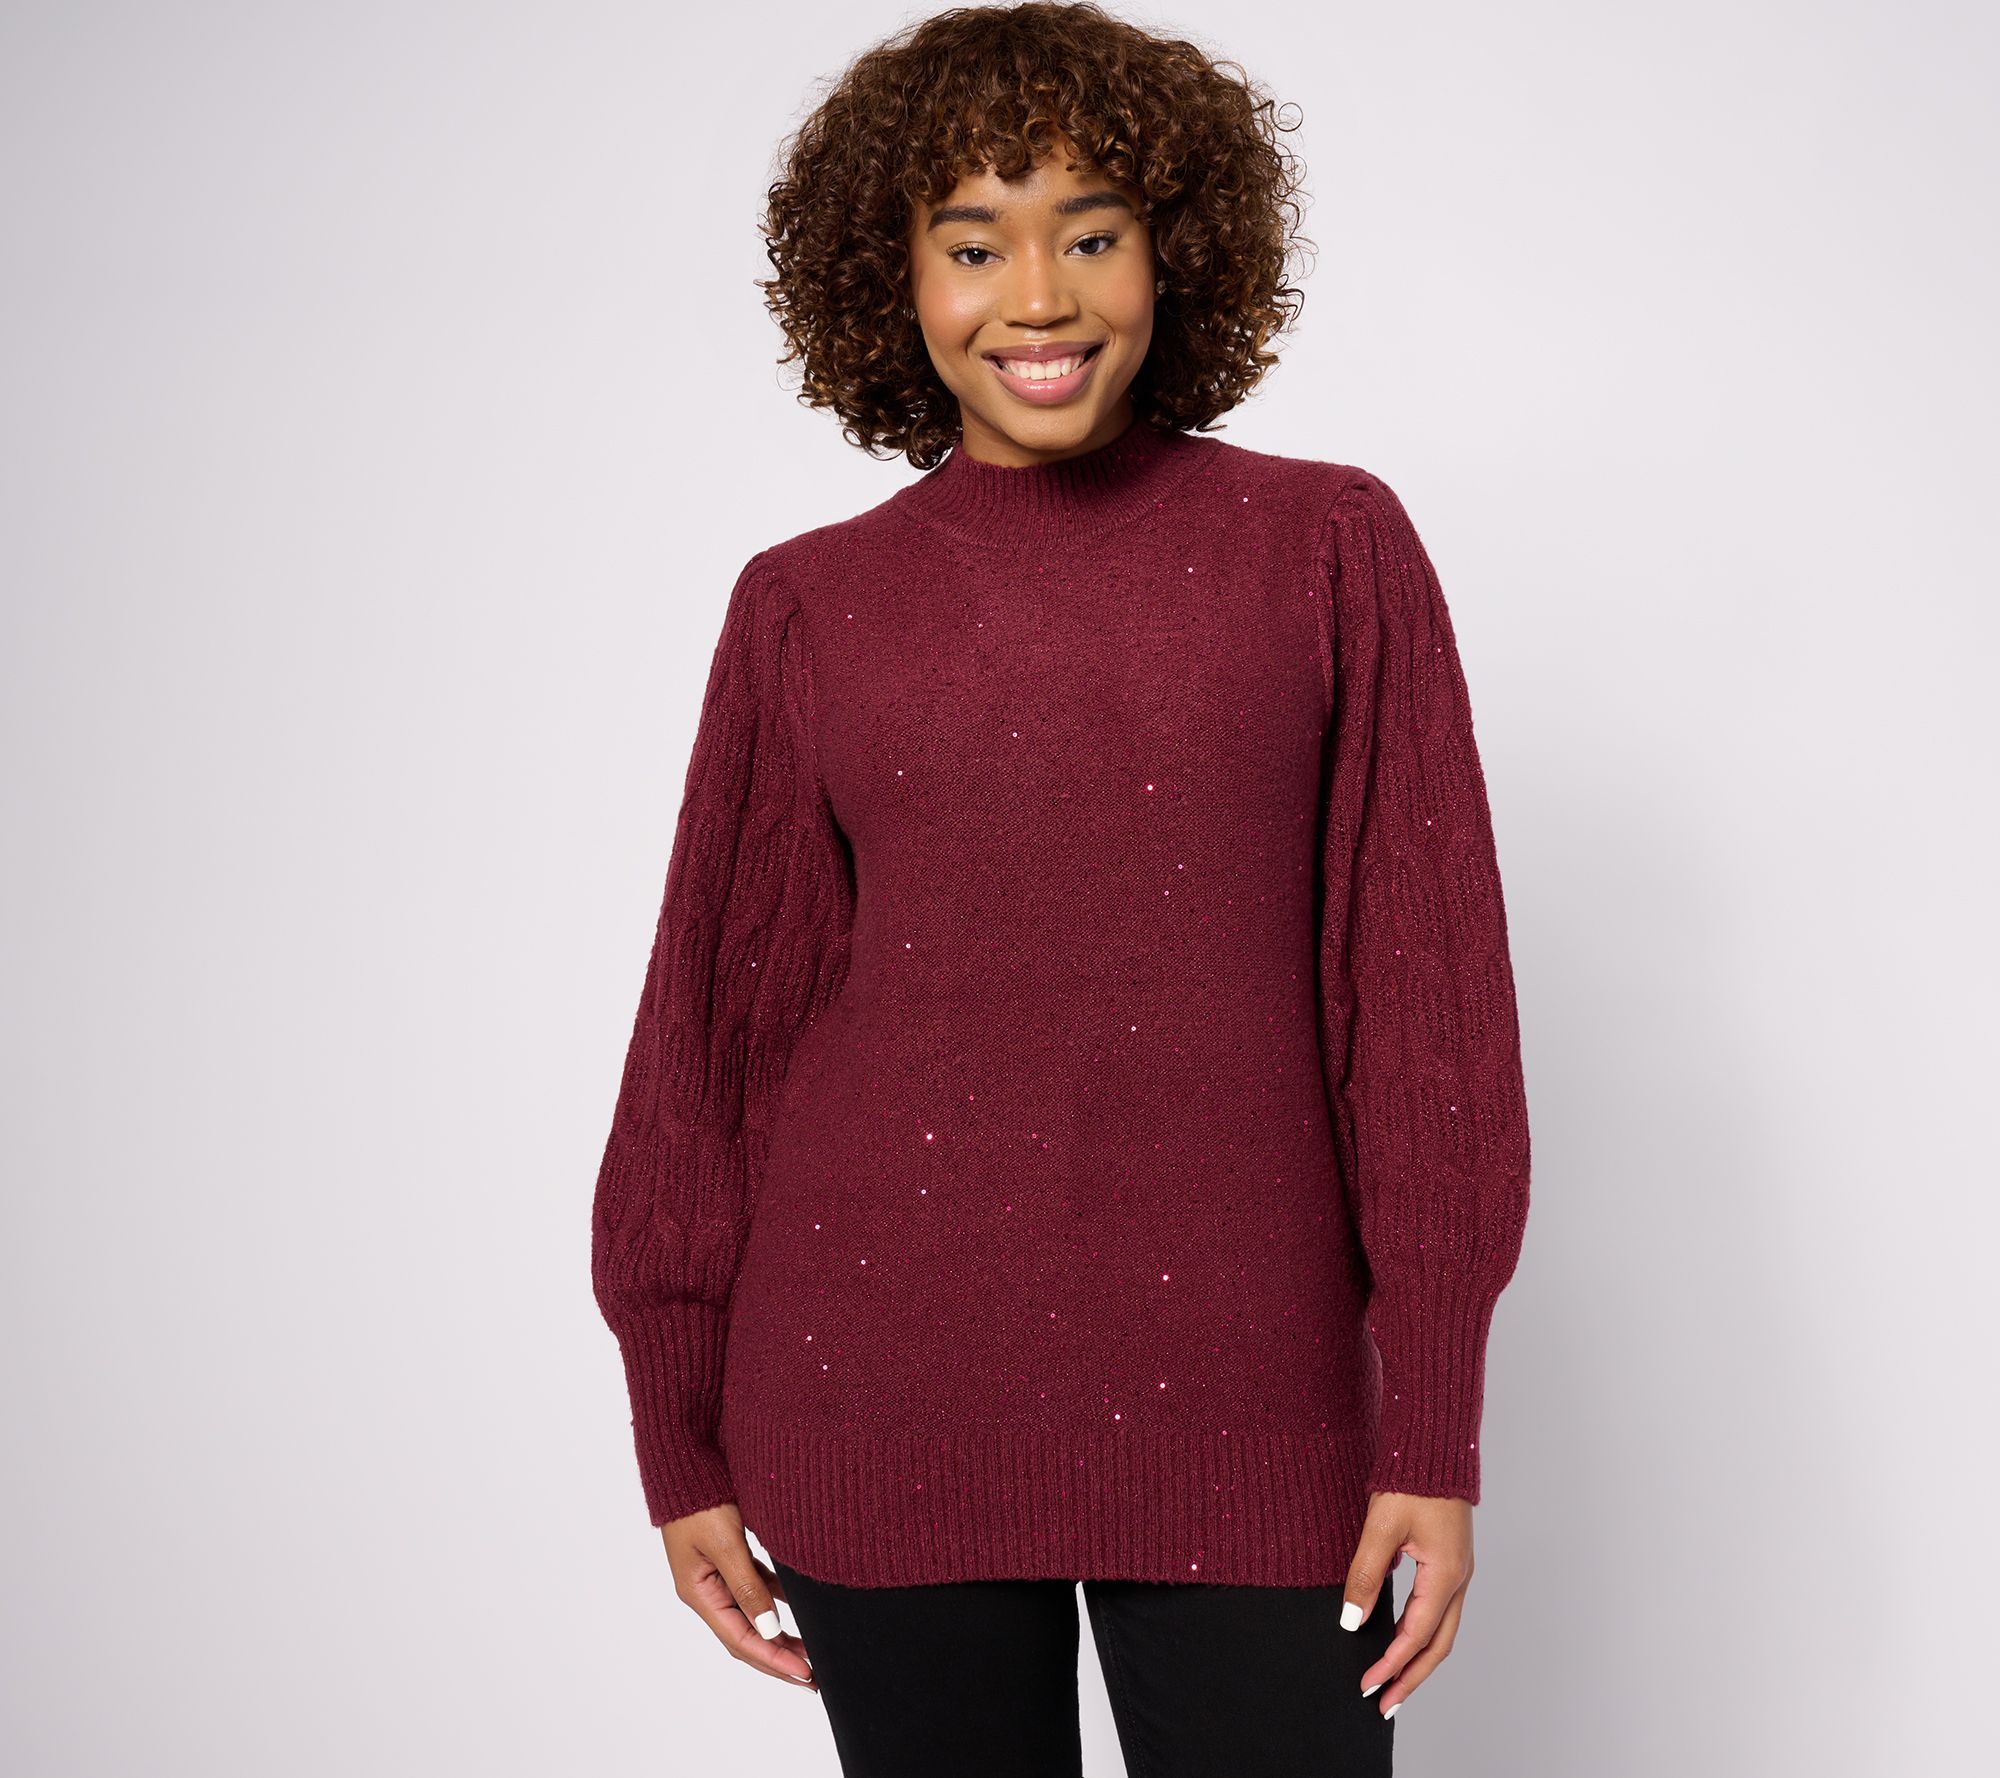 Vince Camuto Shimmer Crewneck Sweaters